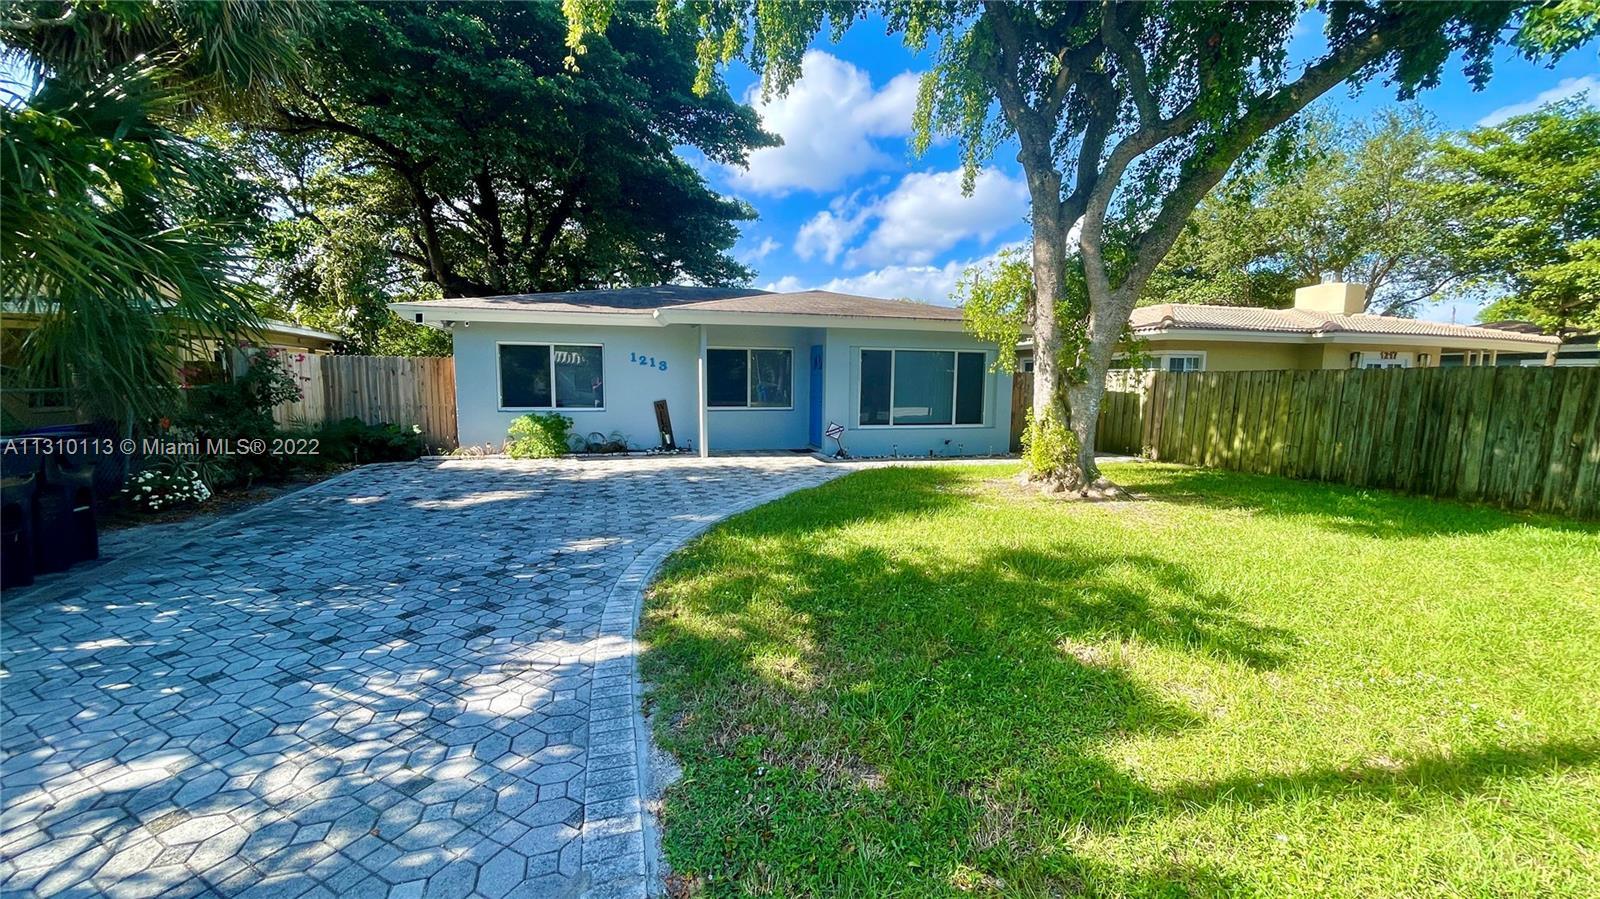 Newly remodeled 3 bdr/1bath home in the heart of Fort Lauderdale. Fully renovated kitchen and bathro